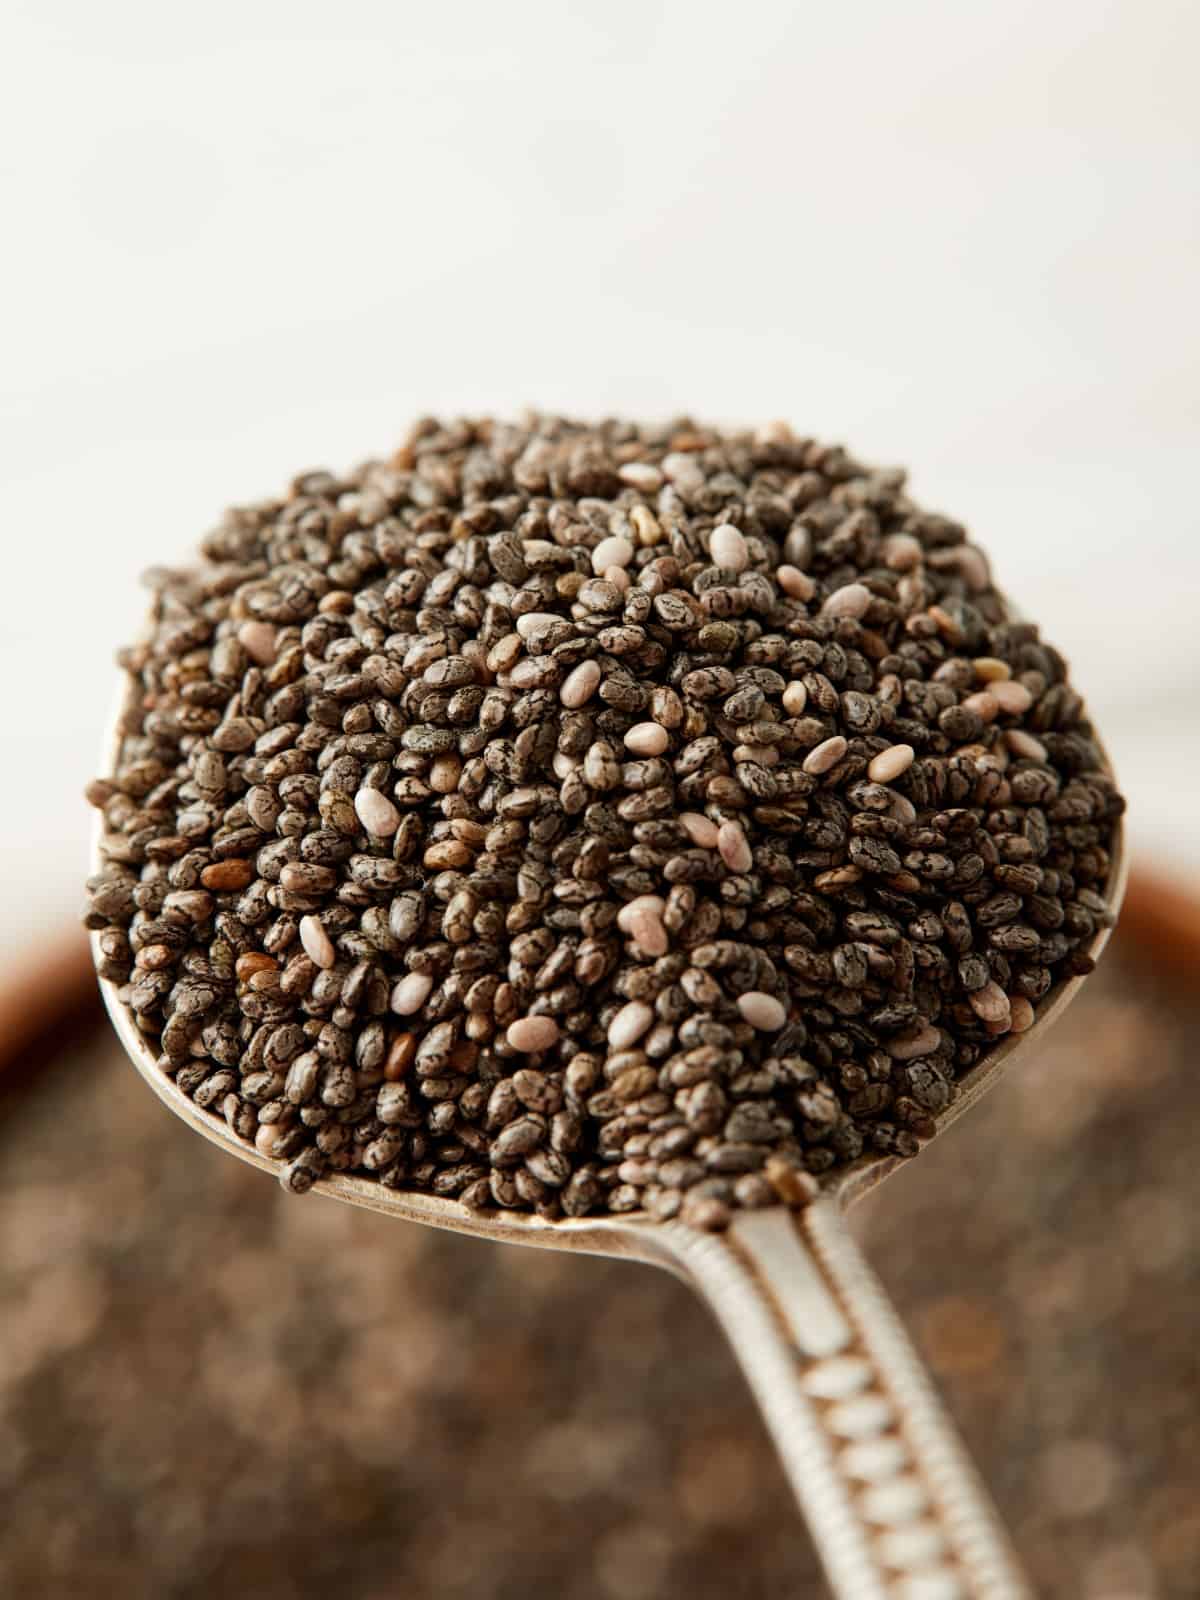 Black chia seeds on spoon up close.